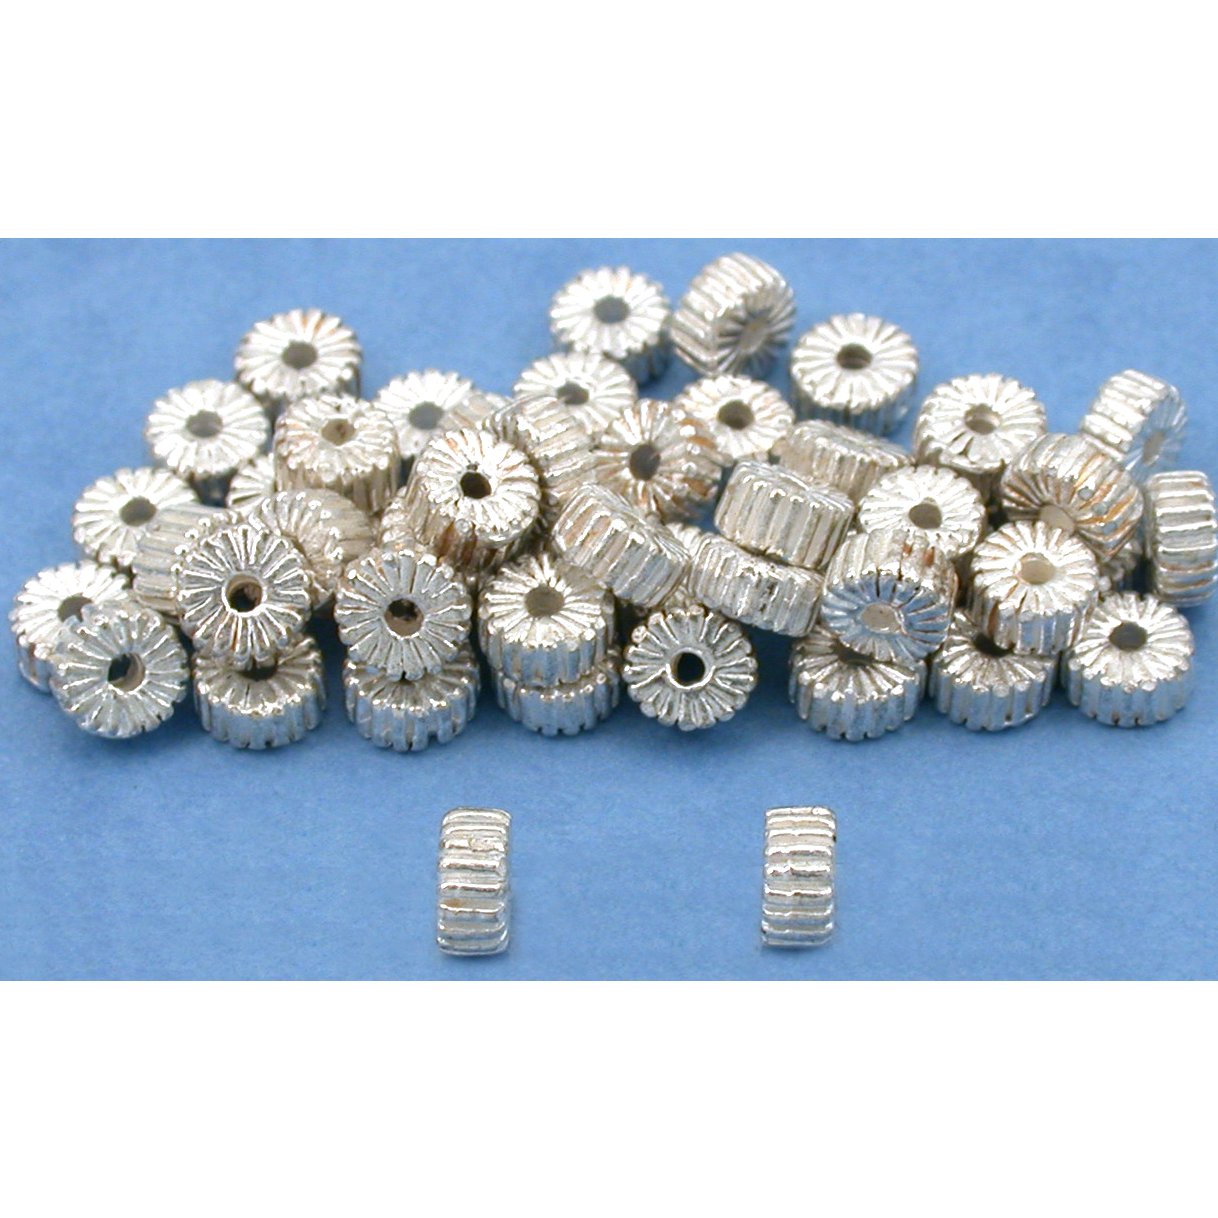 Bali Spacer Corrugated Beads Silver Plated 5mm 50Pcs Approx.